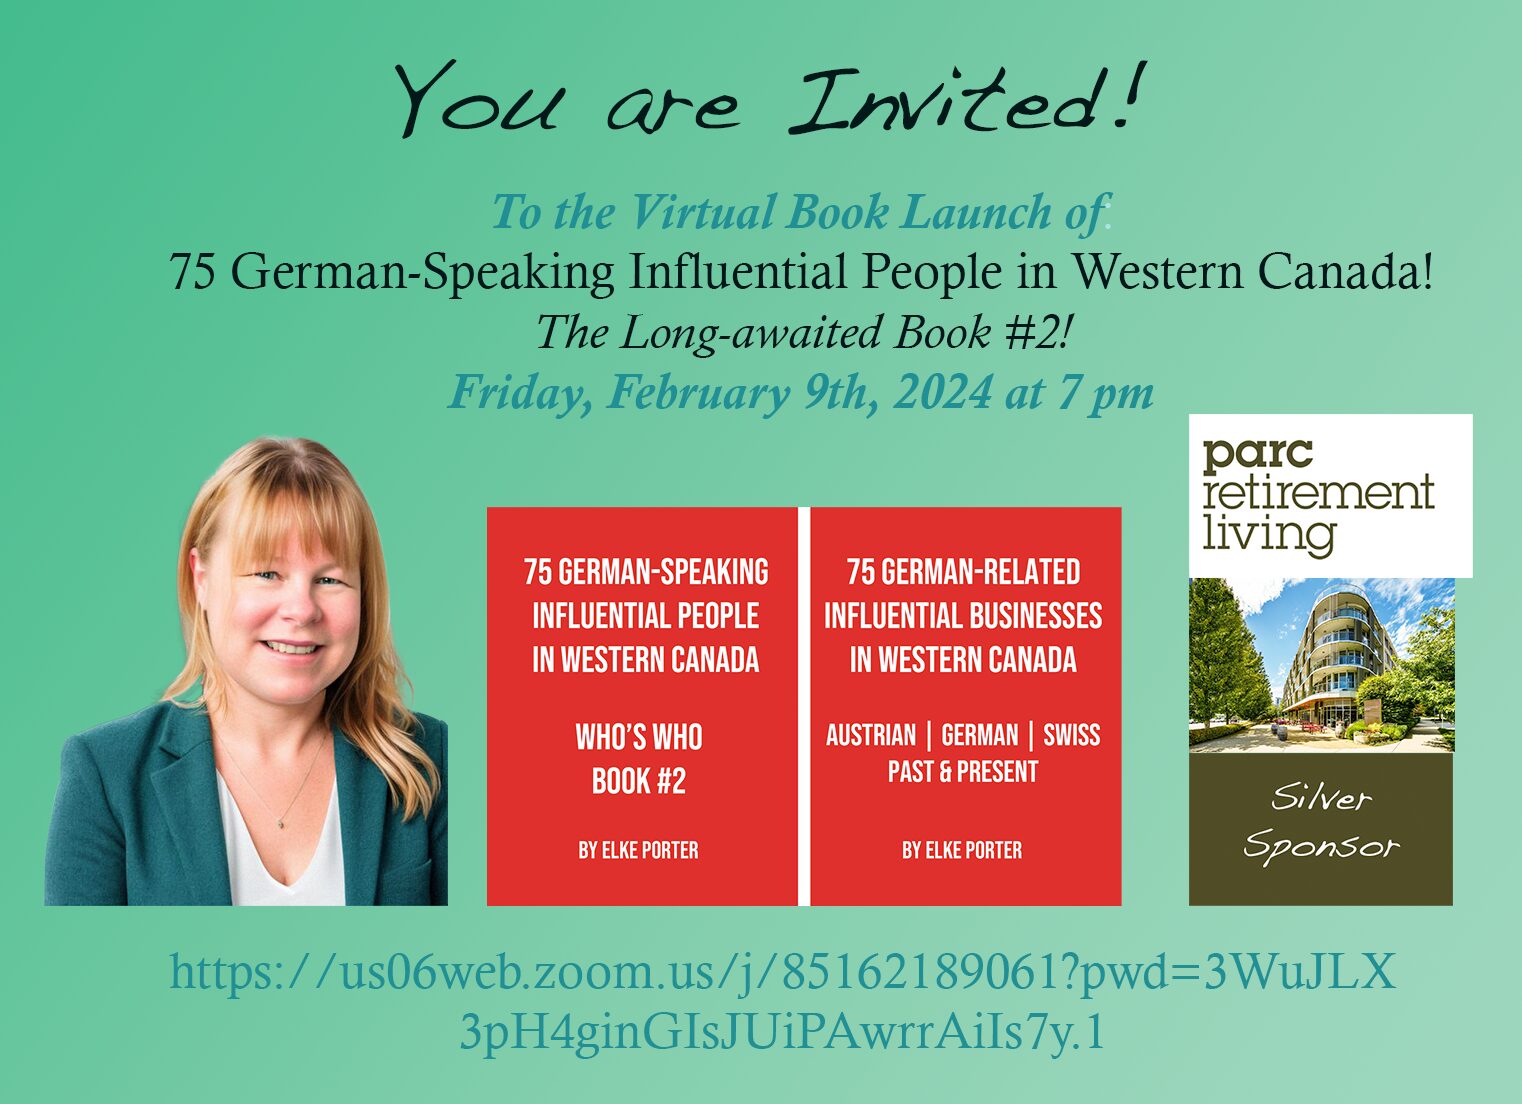 Celebrating Legacy and Diversity: 75 German-Speaking Influential People in Western Canada – Book #2